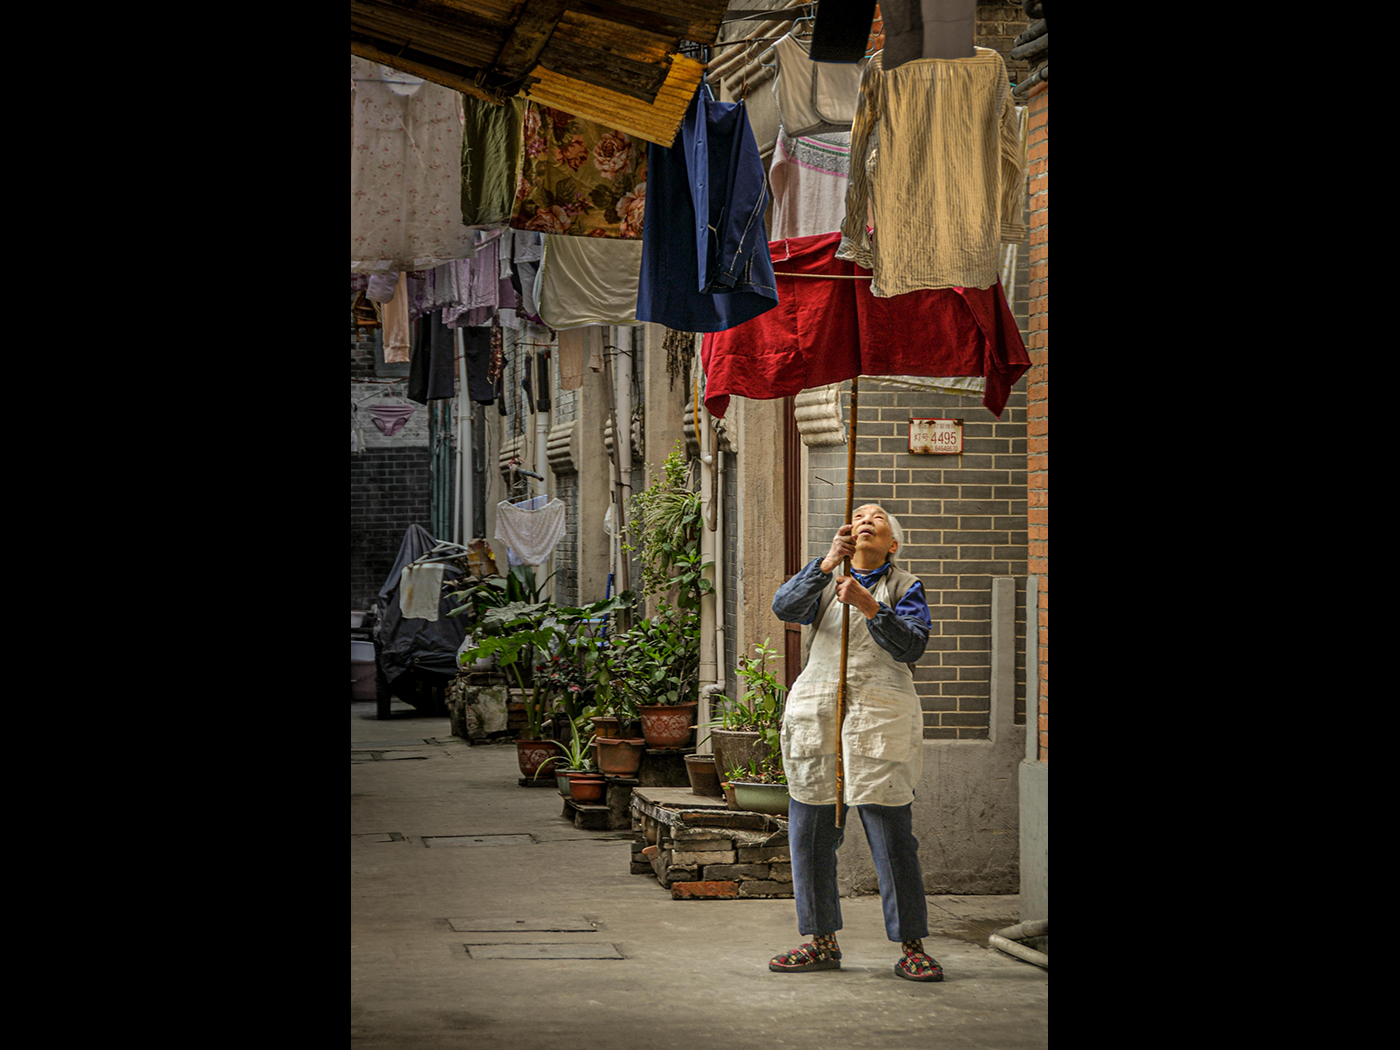 CHINESE-LAUNDRY-by-Lois-Webb-1